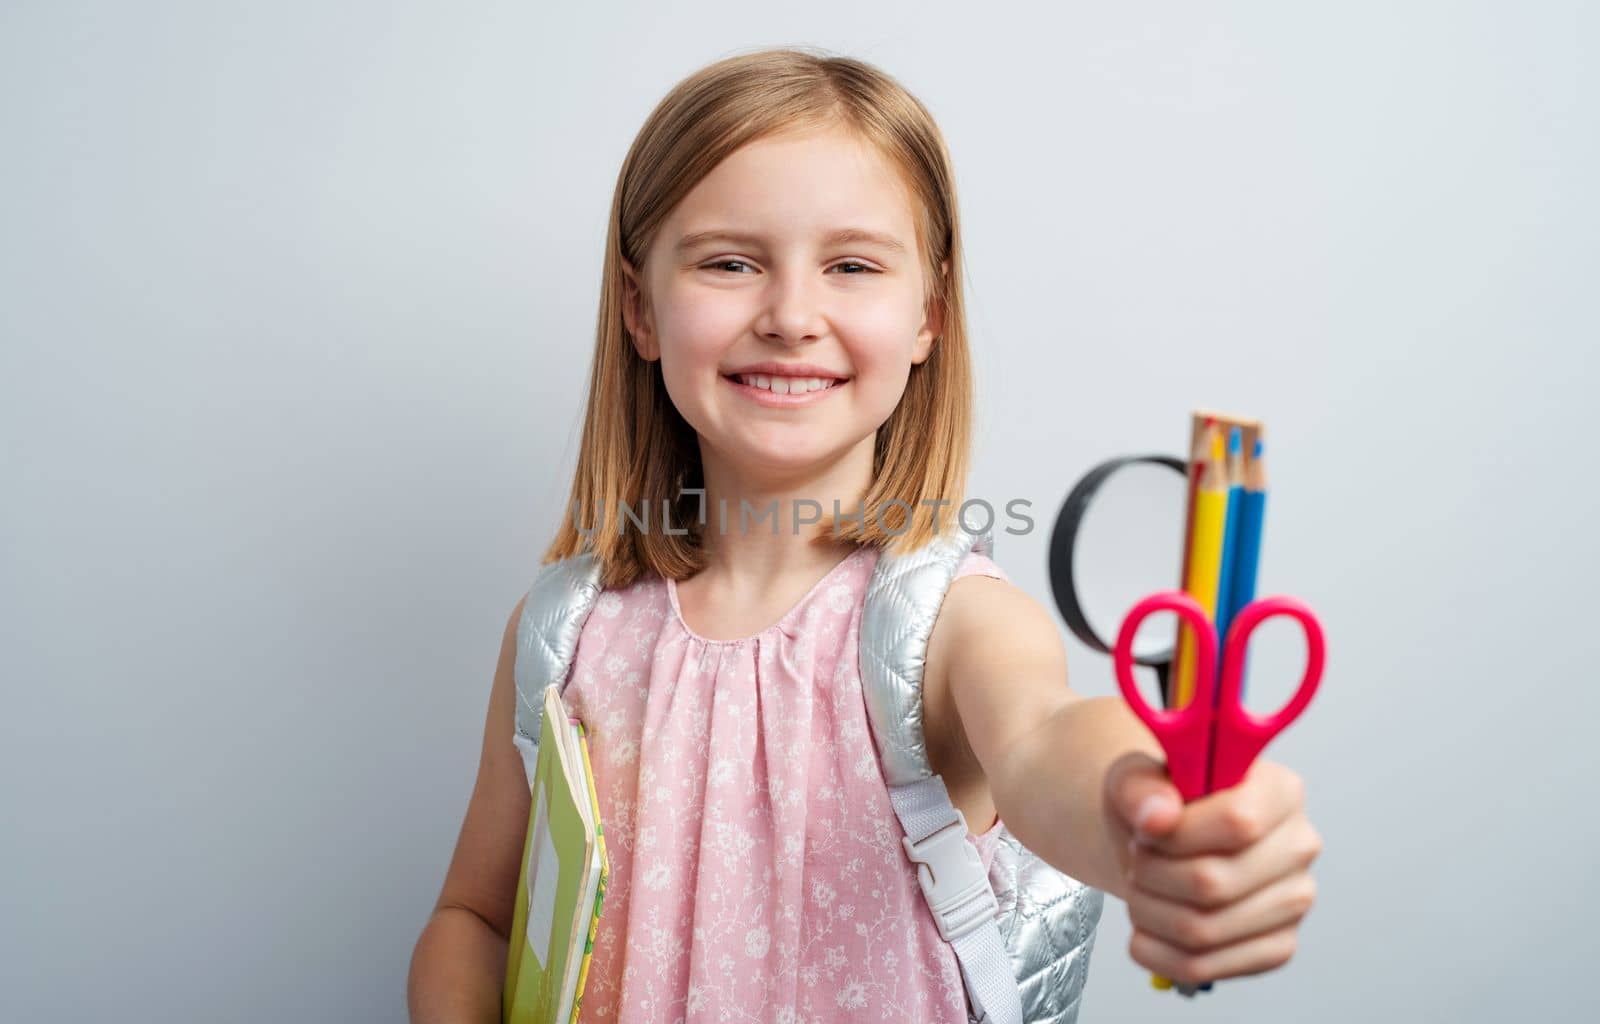 Portrait of schoolgirl with stationery supplies on gray background